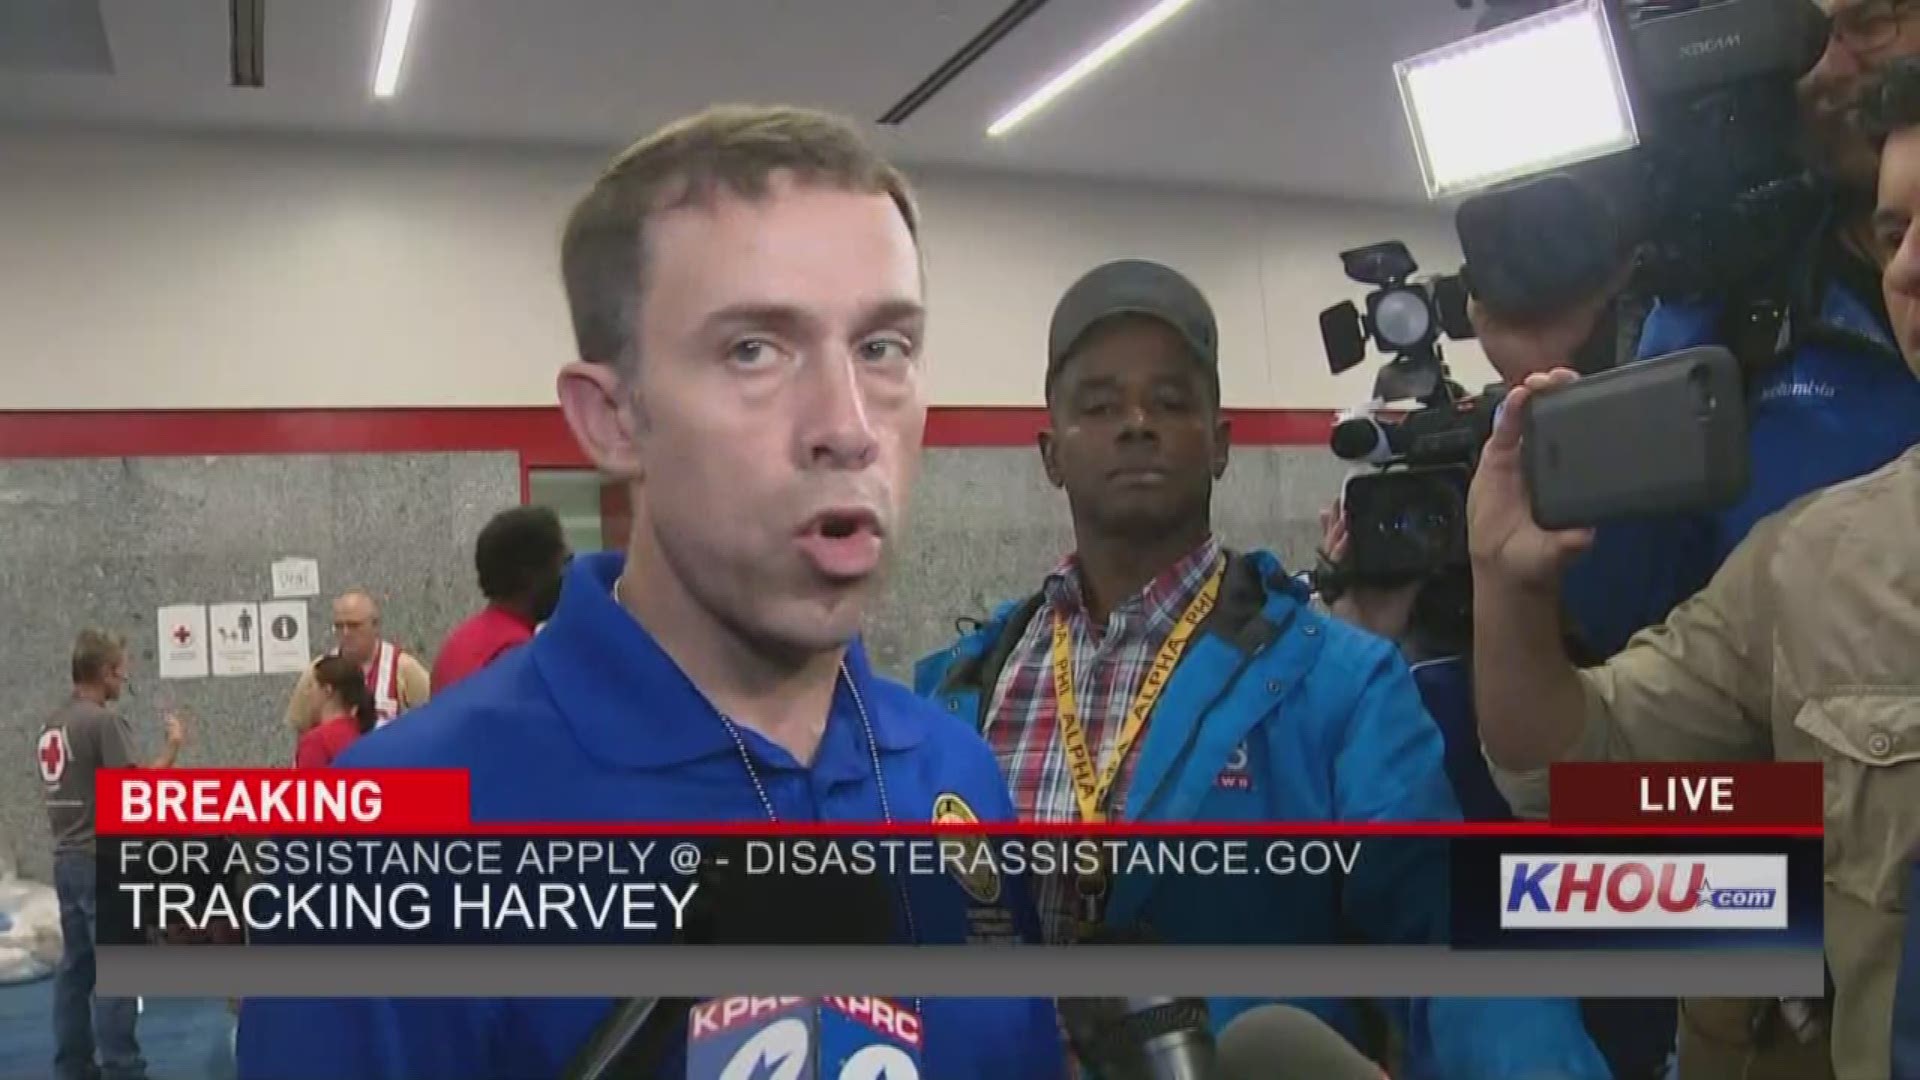 Houston Director of housing Tom McCasland gives updates on the George R. Brown convention center shelter. Things are under control at the center, where 9,000 people are seeking refuge from tropical storm Harvey.